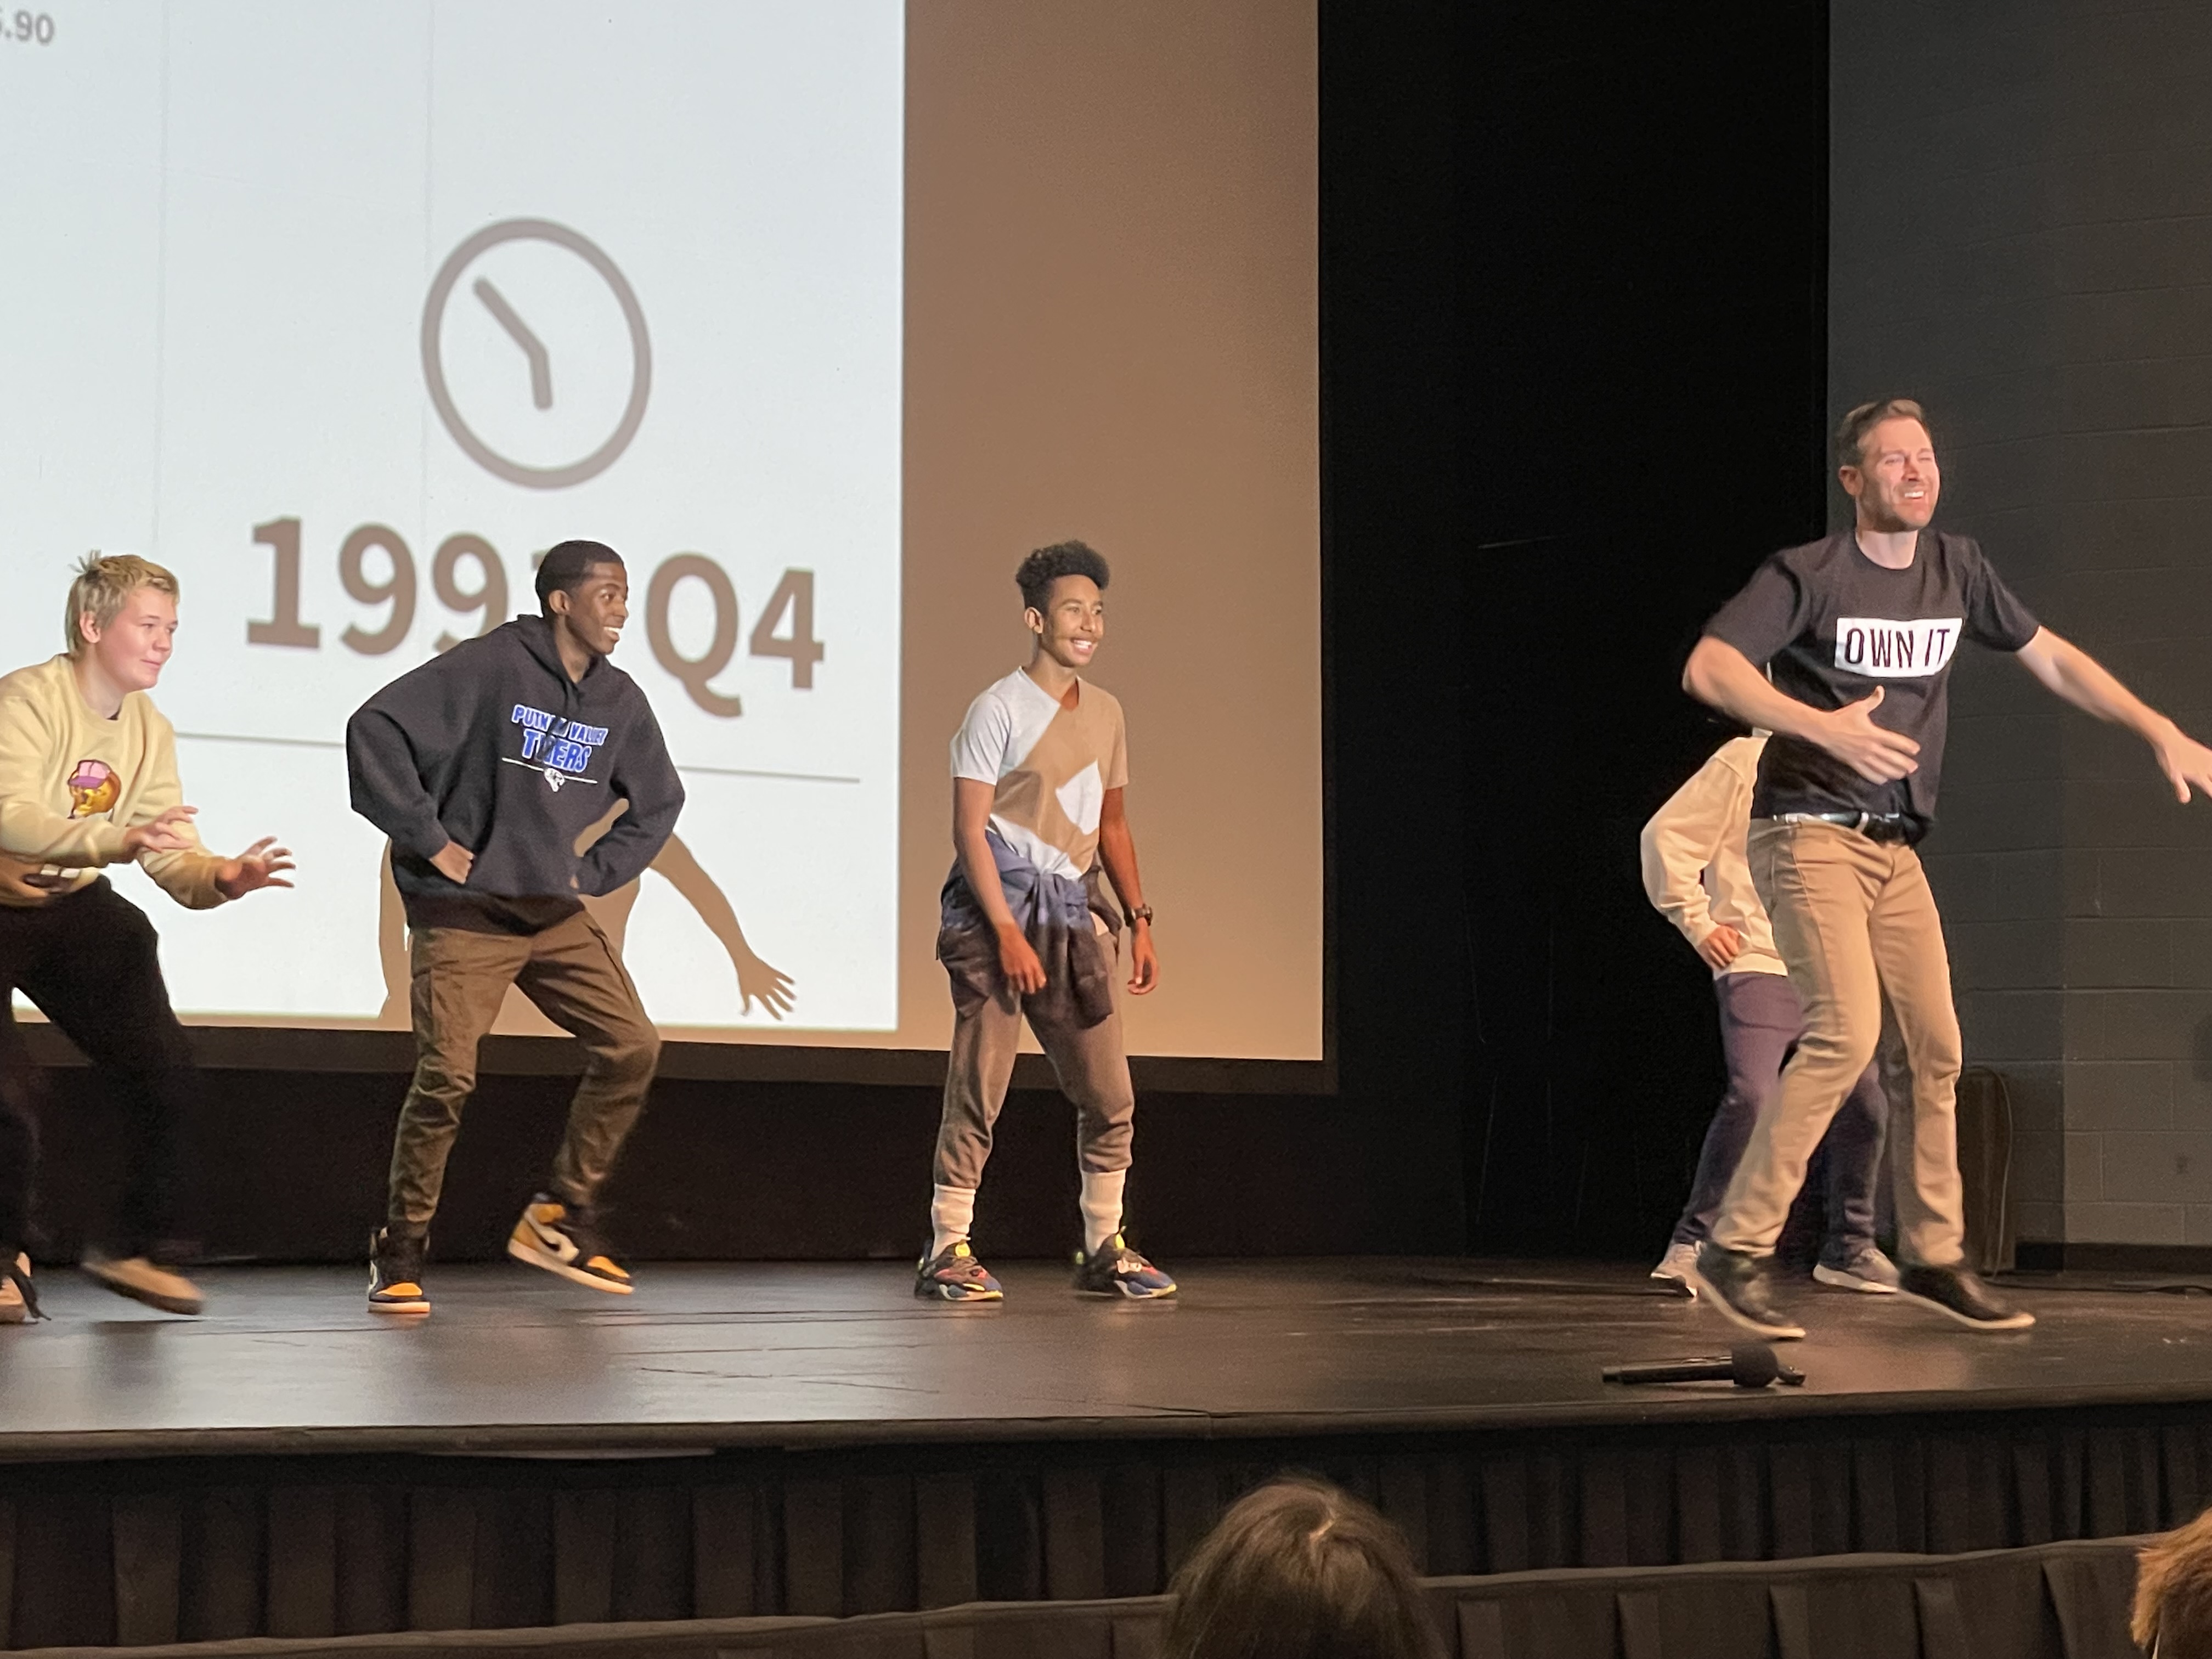 Our PVMS 8th graders had the privilege of watching inspirational speaker, Brandon Lee White. He was extremely engaging and spoke with students about overcoming challenges and to "Own It." Thank you to our PTA Arts in Education for sponsoring this event.